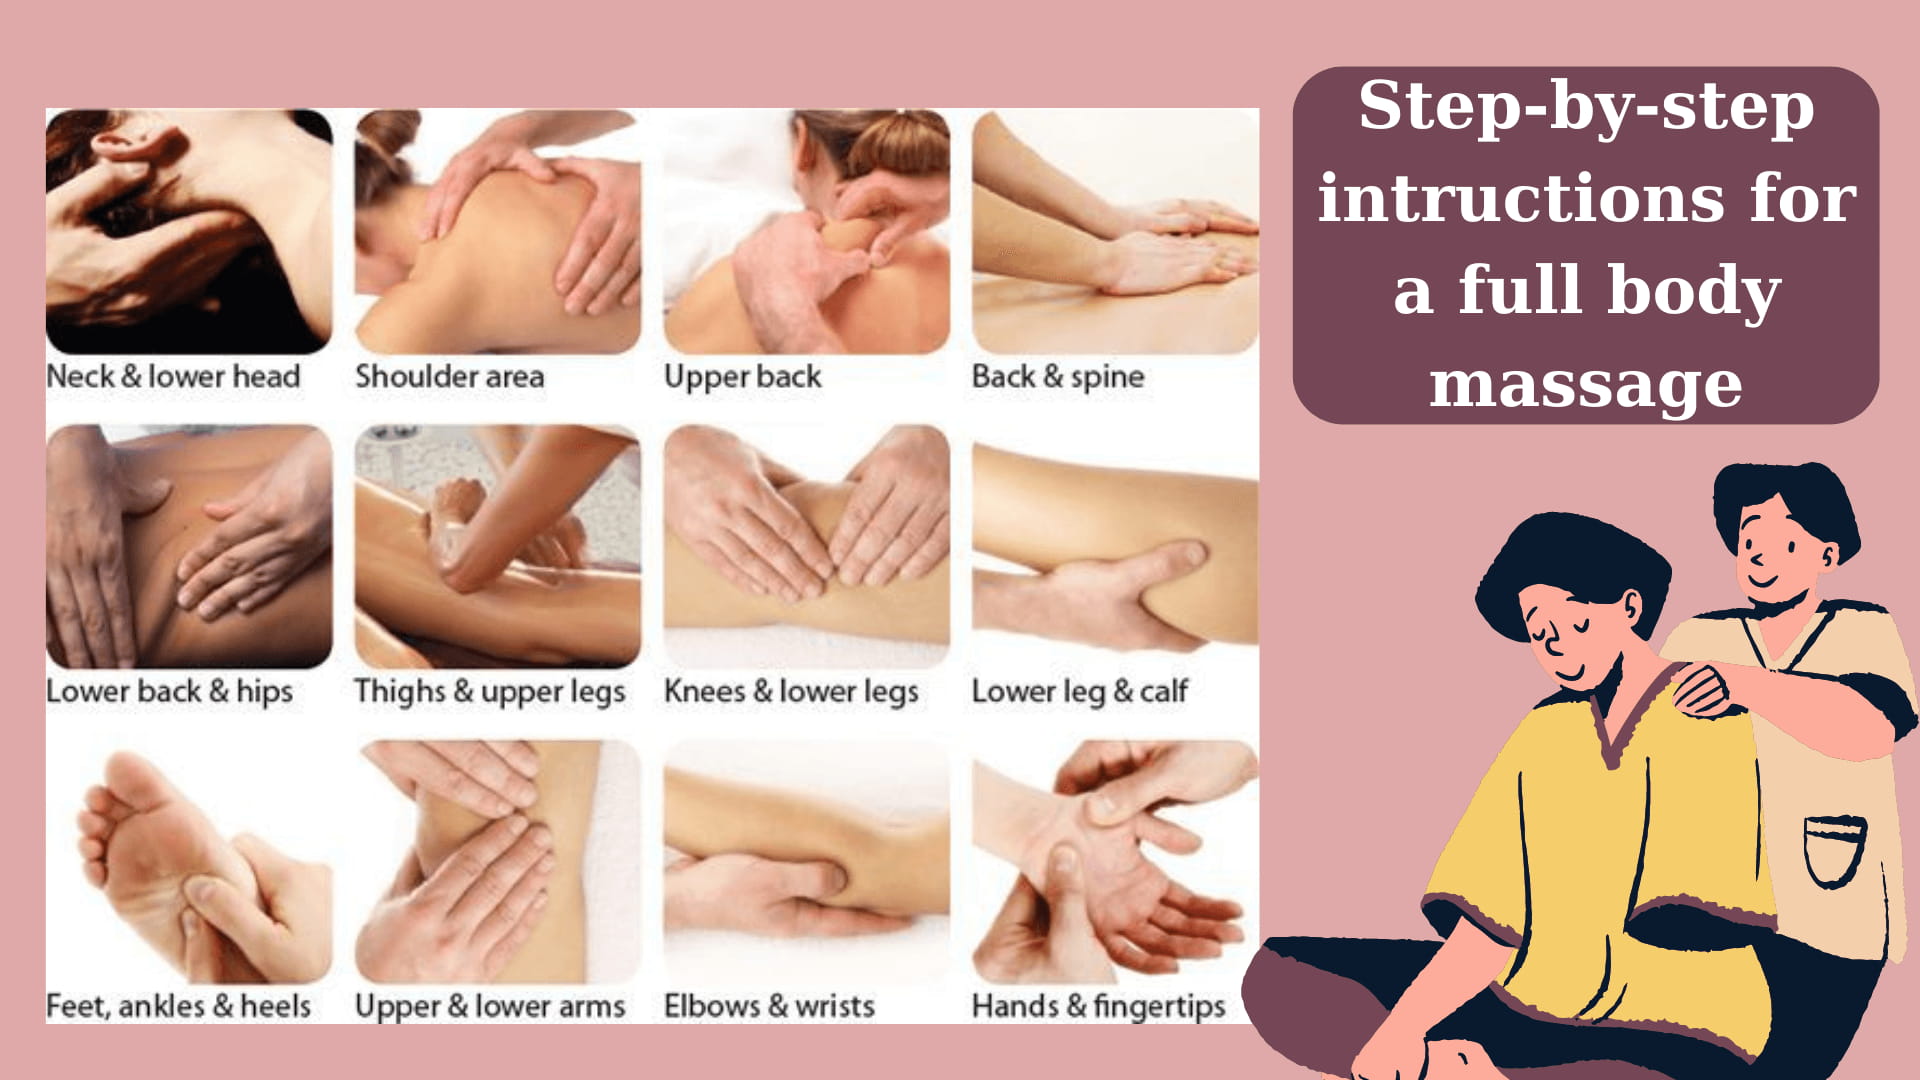 Step-by-step intructions for a full body massage